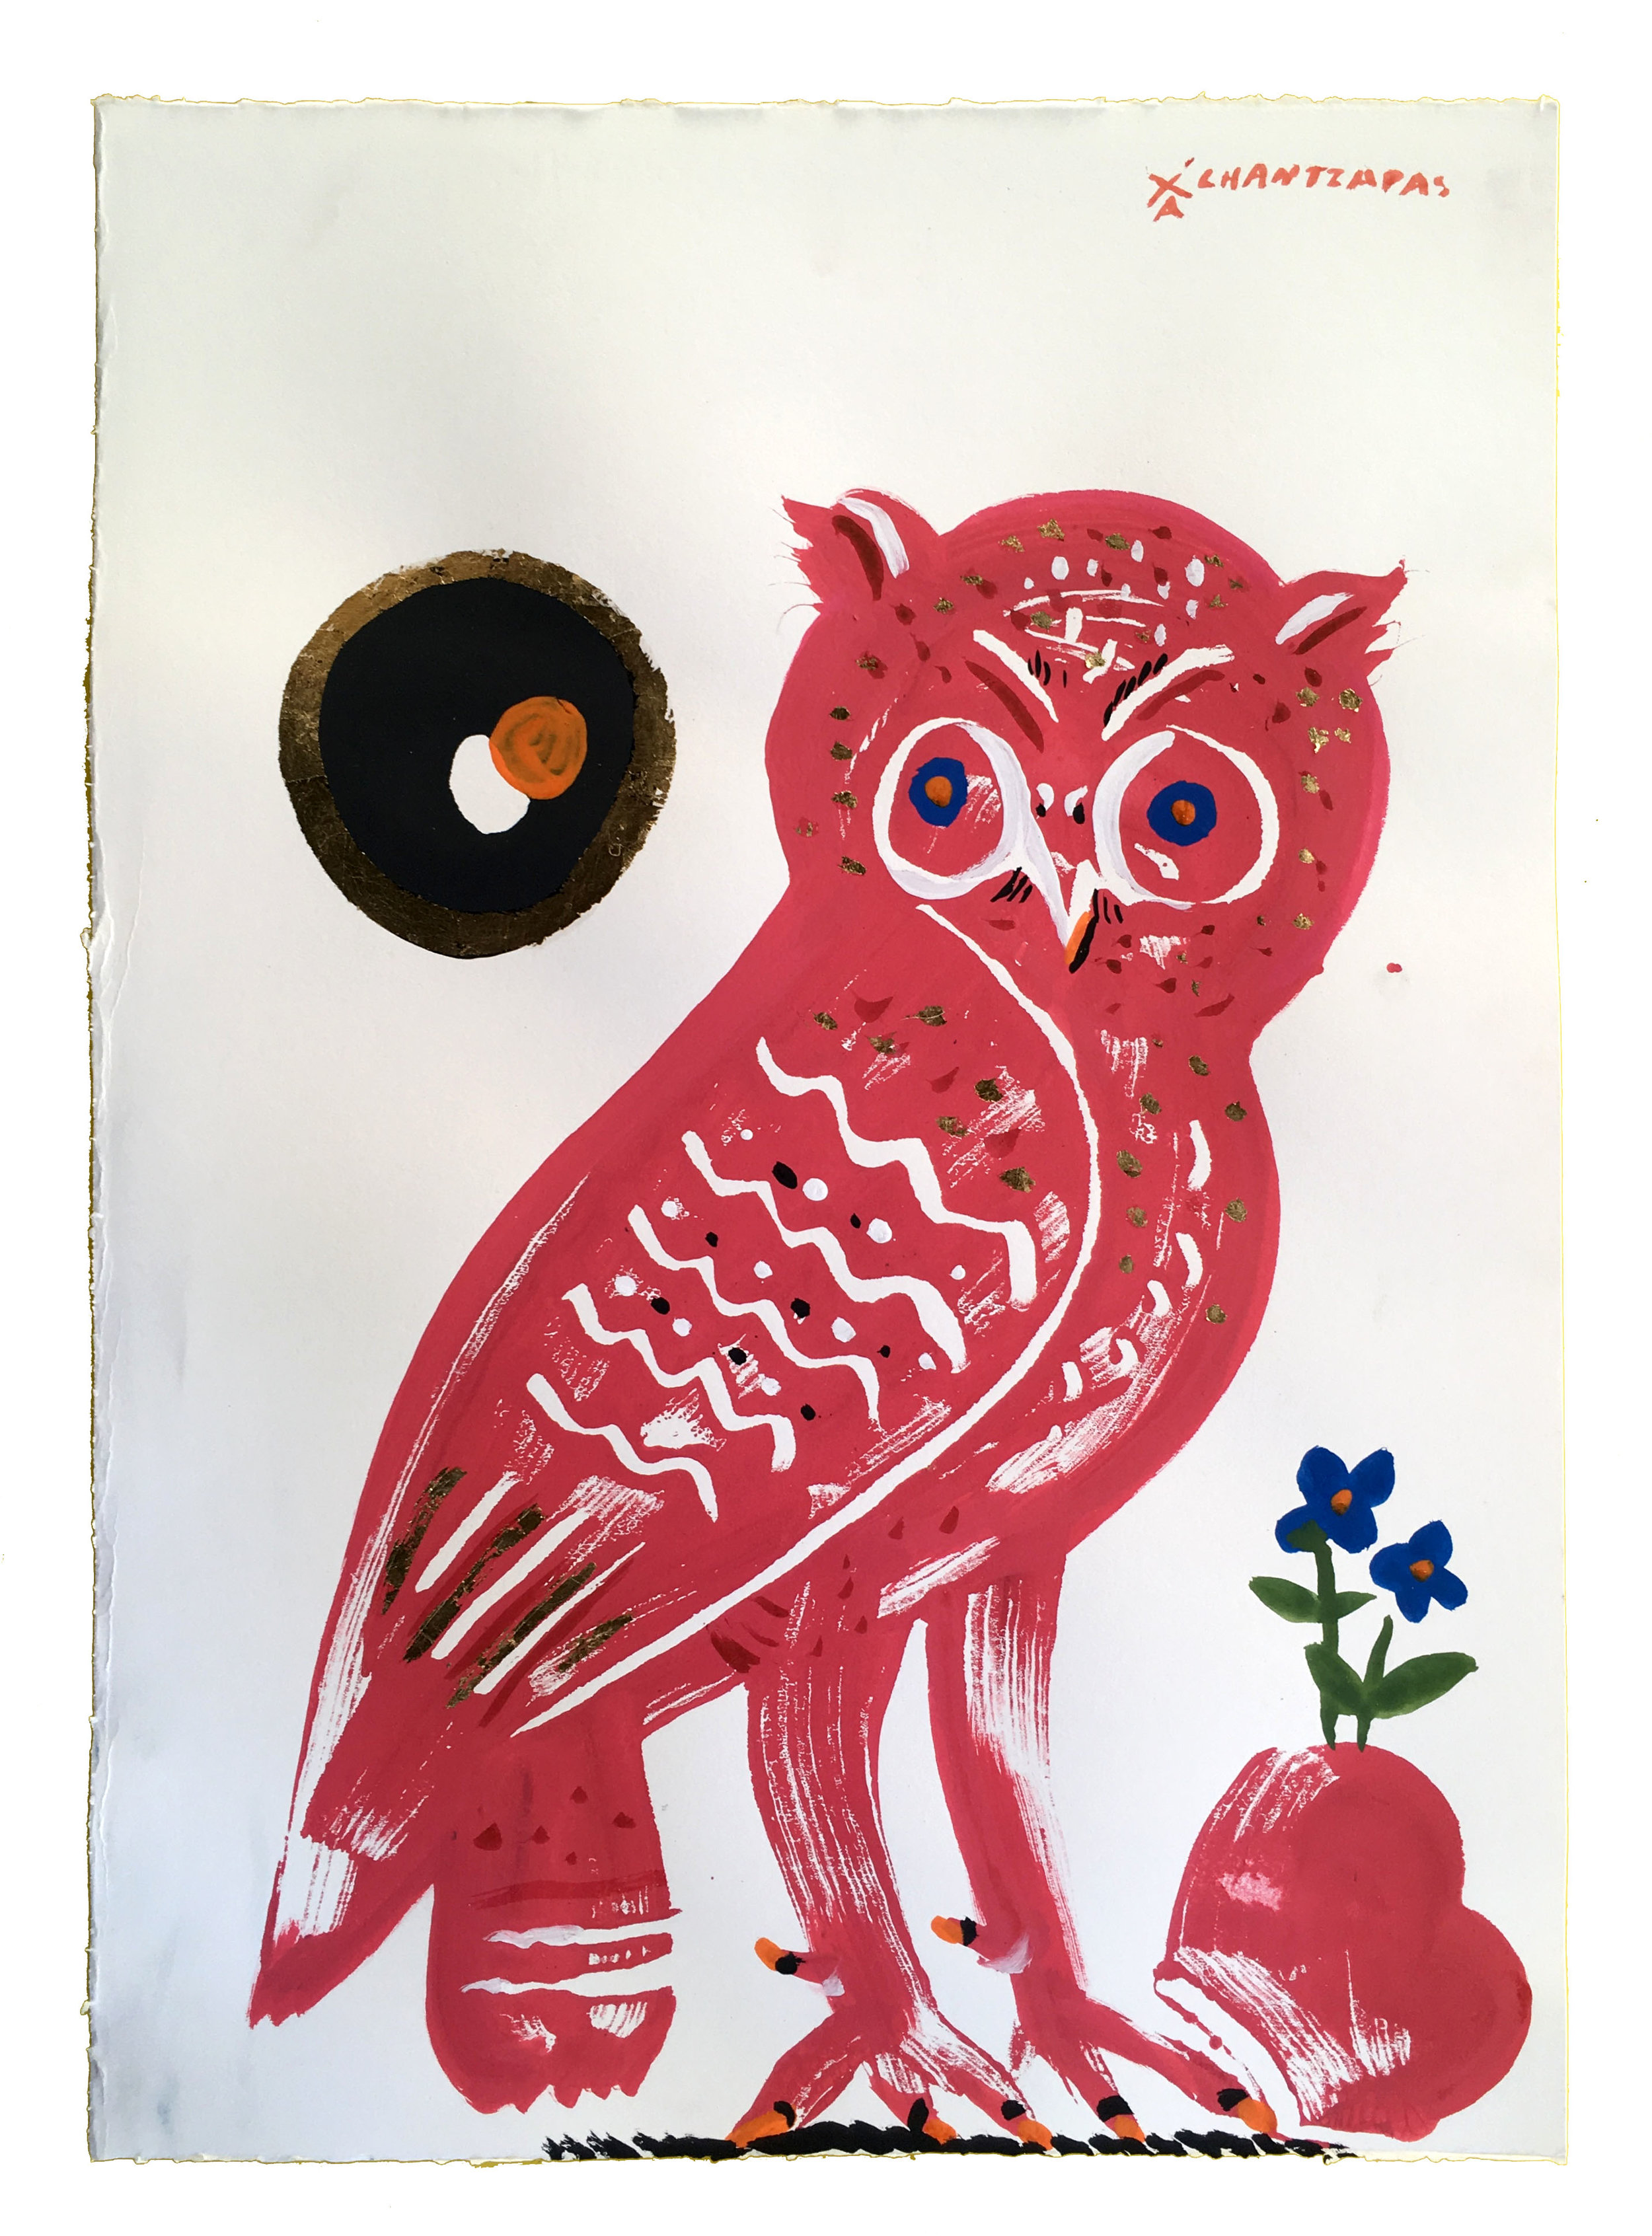   Owl 12 - Red Eirene  Acrylic and watercolour on Fabriano paper, Unique Artwork: 30” x 24” / 76x 60 cm - custom white box frame 